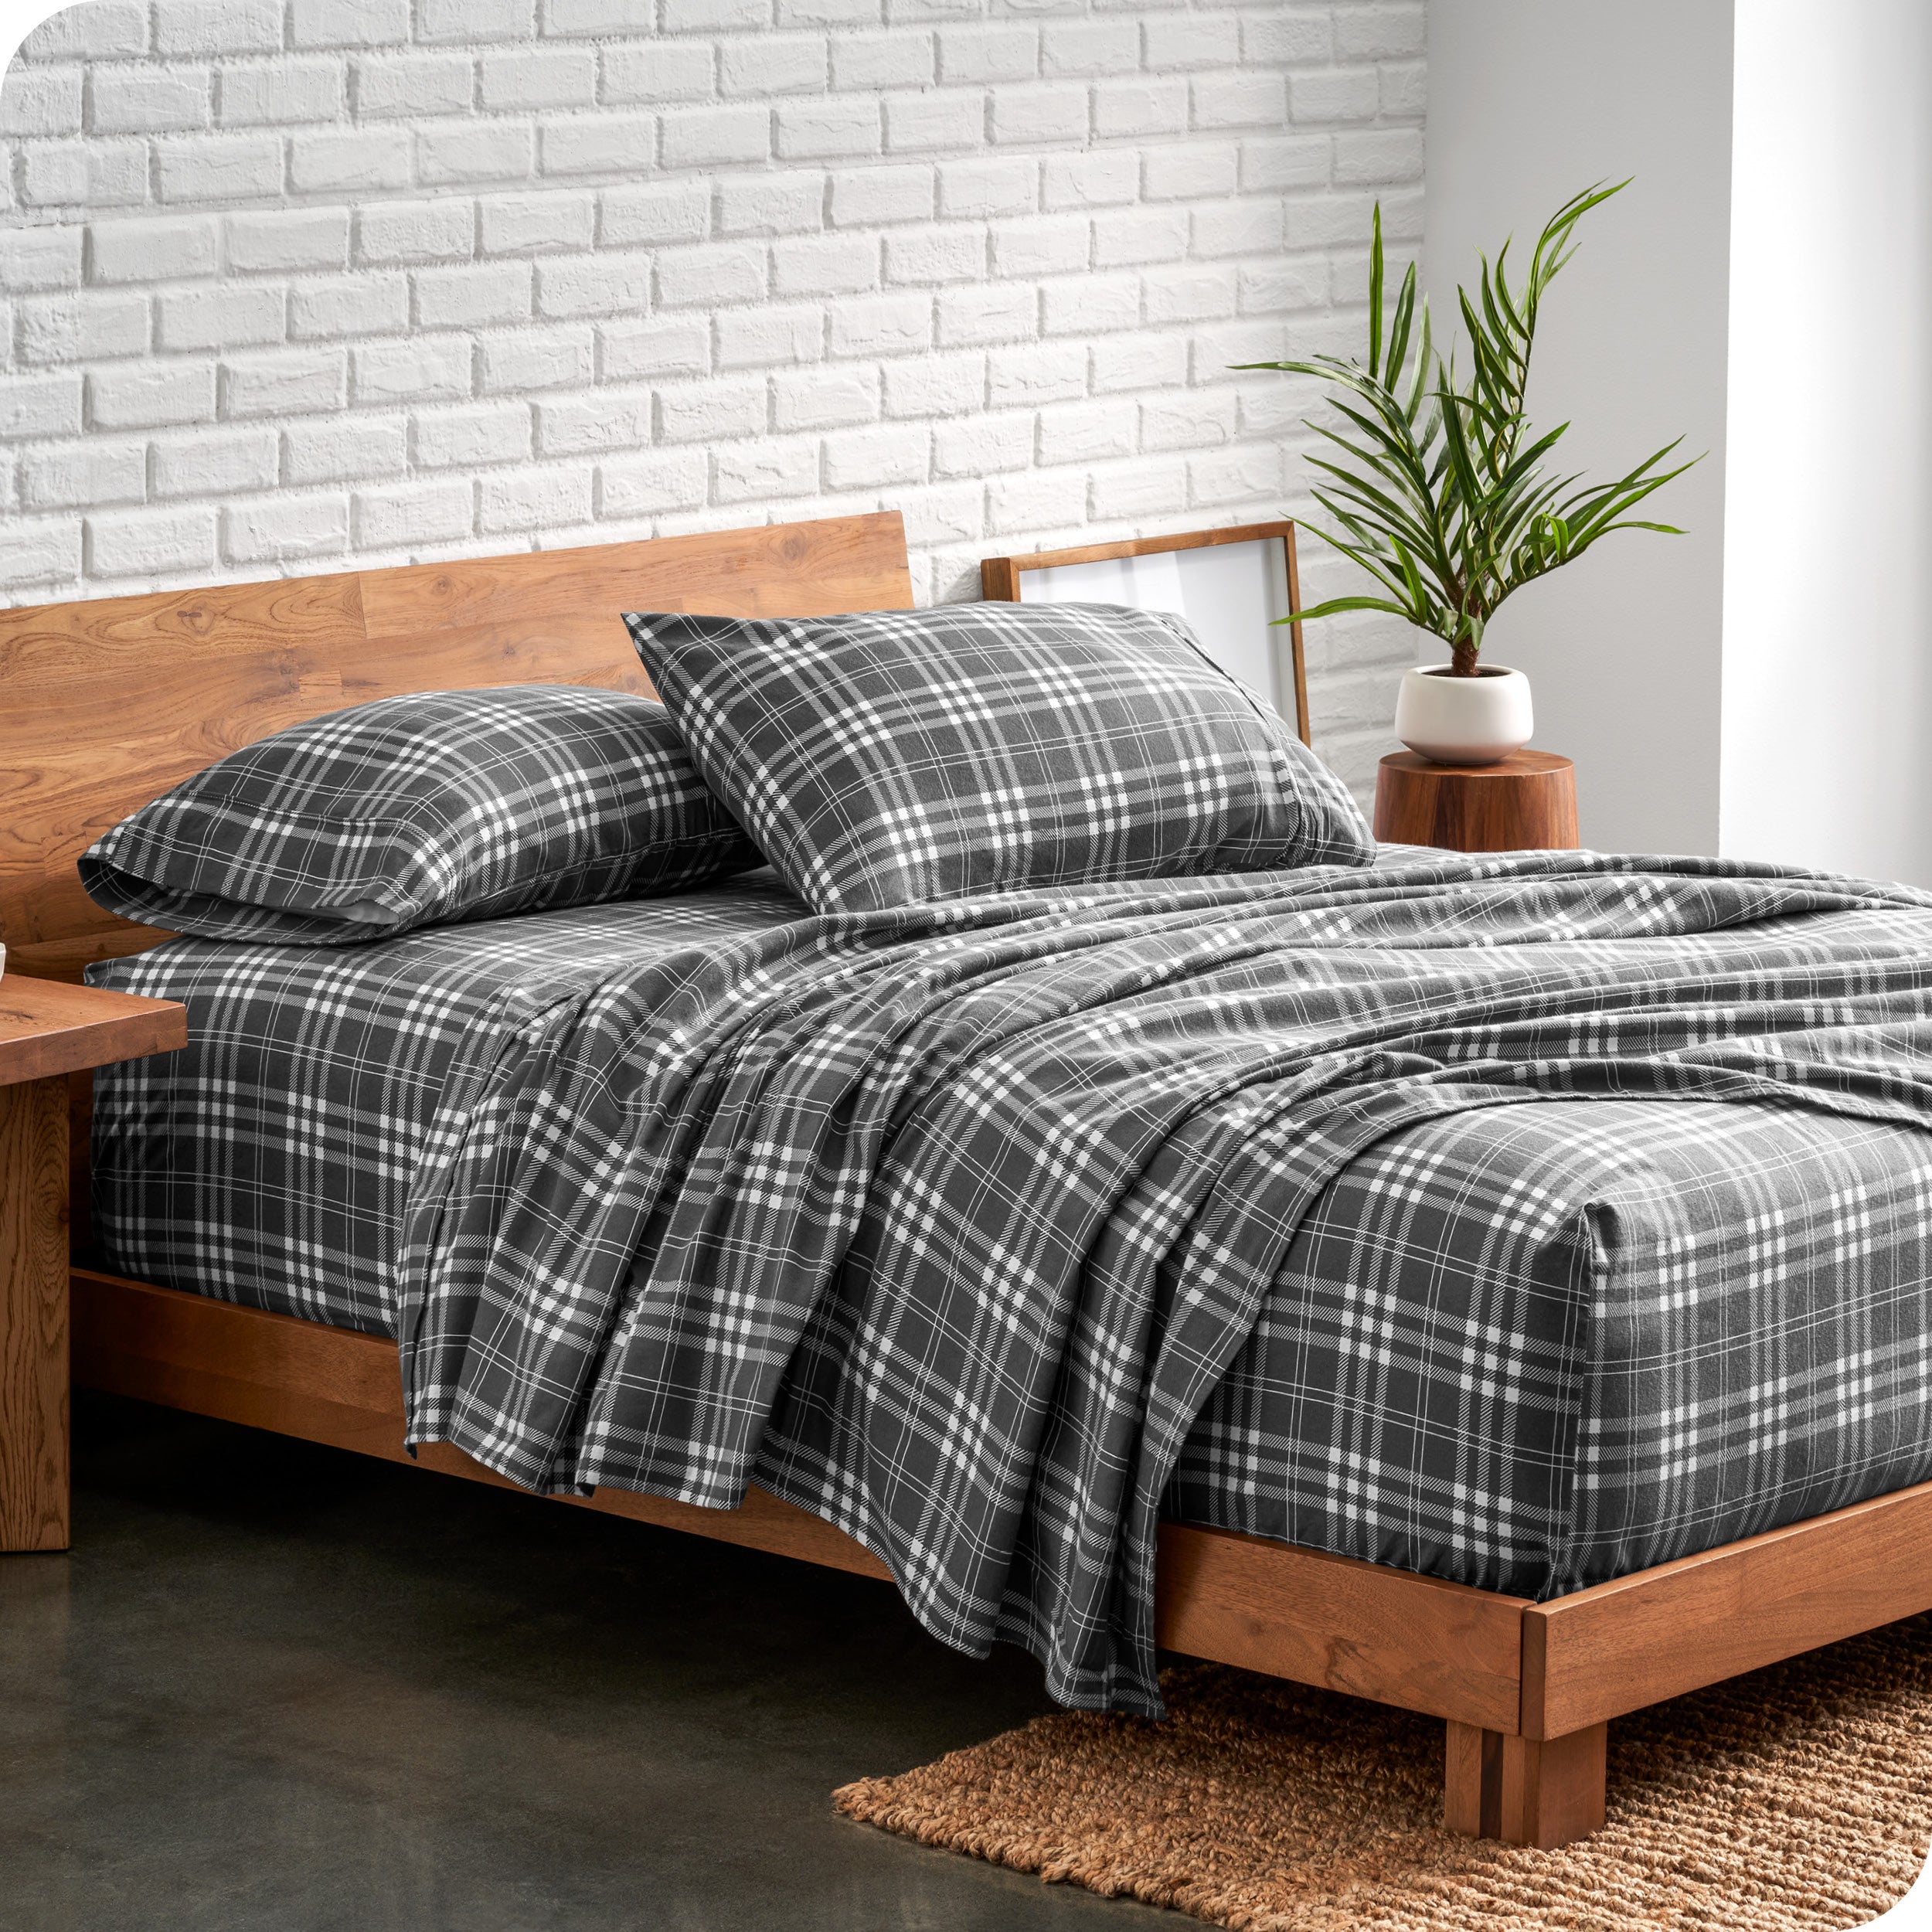 A bed made with printed flannel sheets